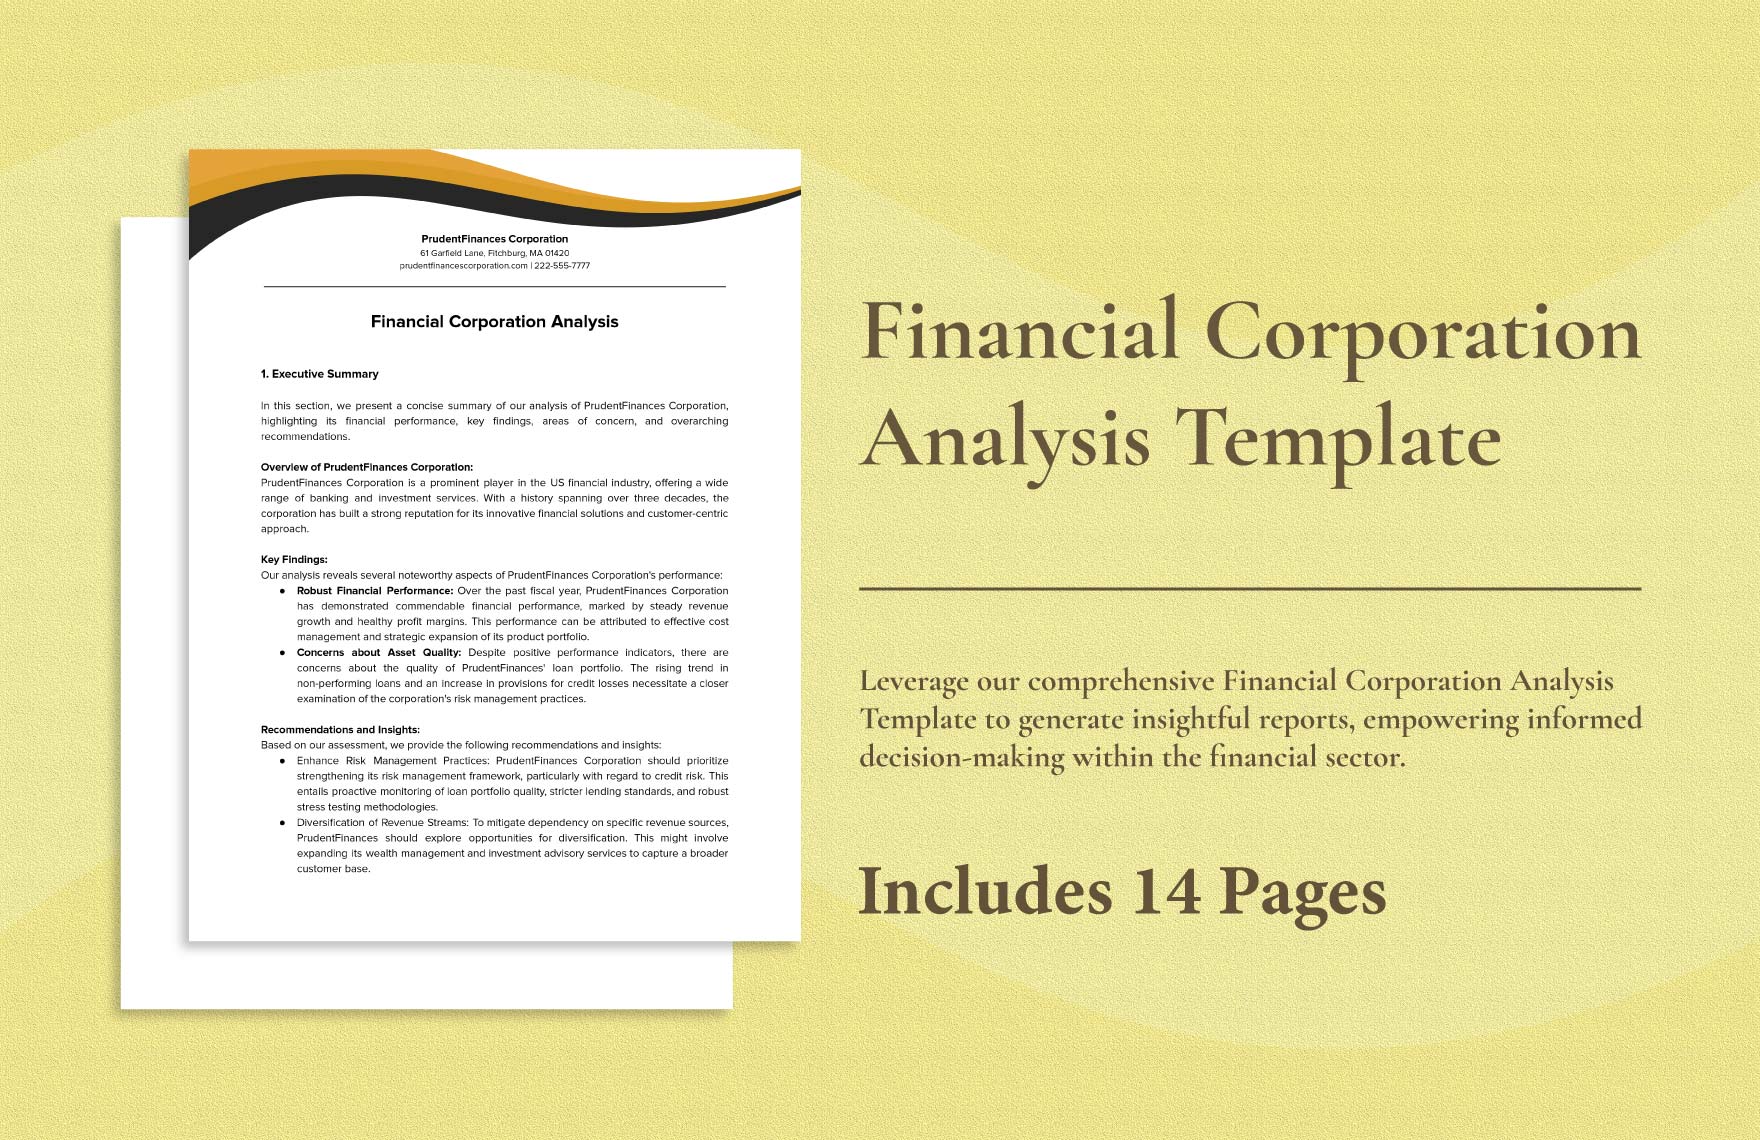 Financial Corporation Analysis Template